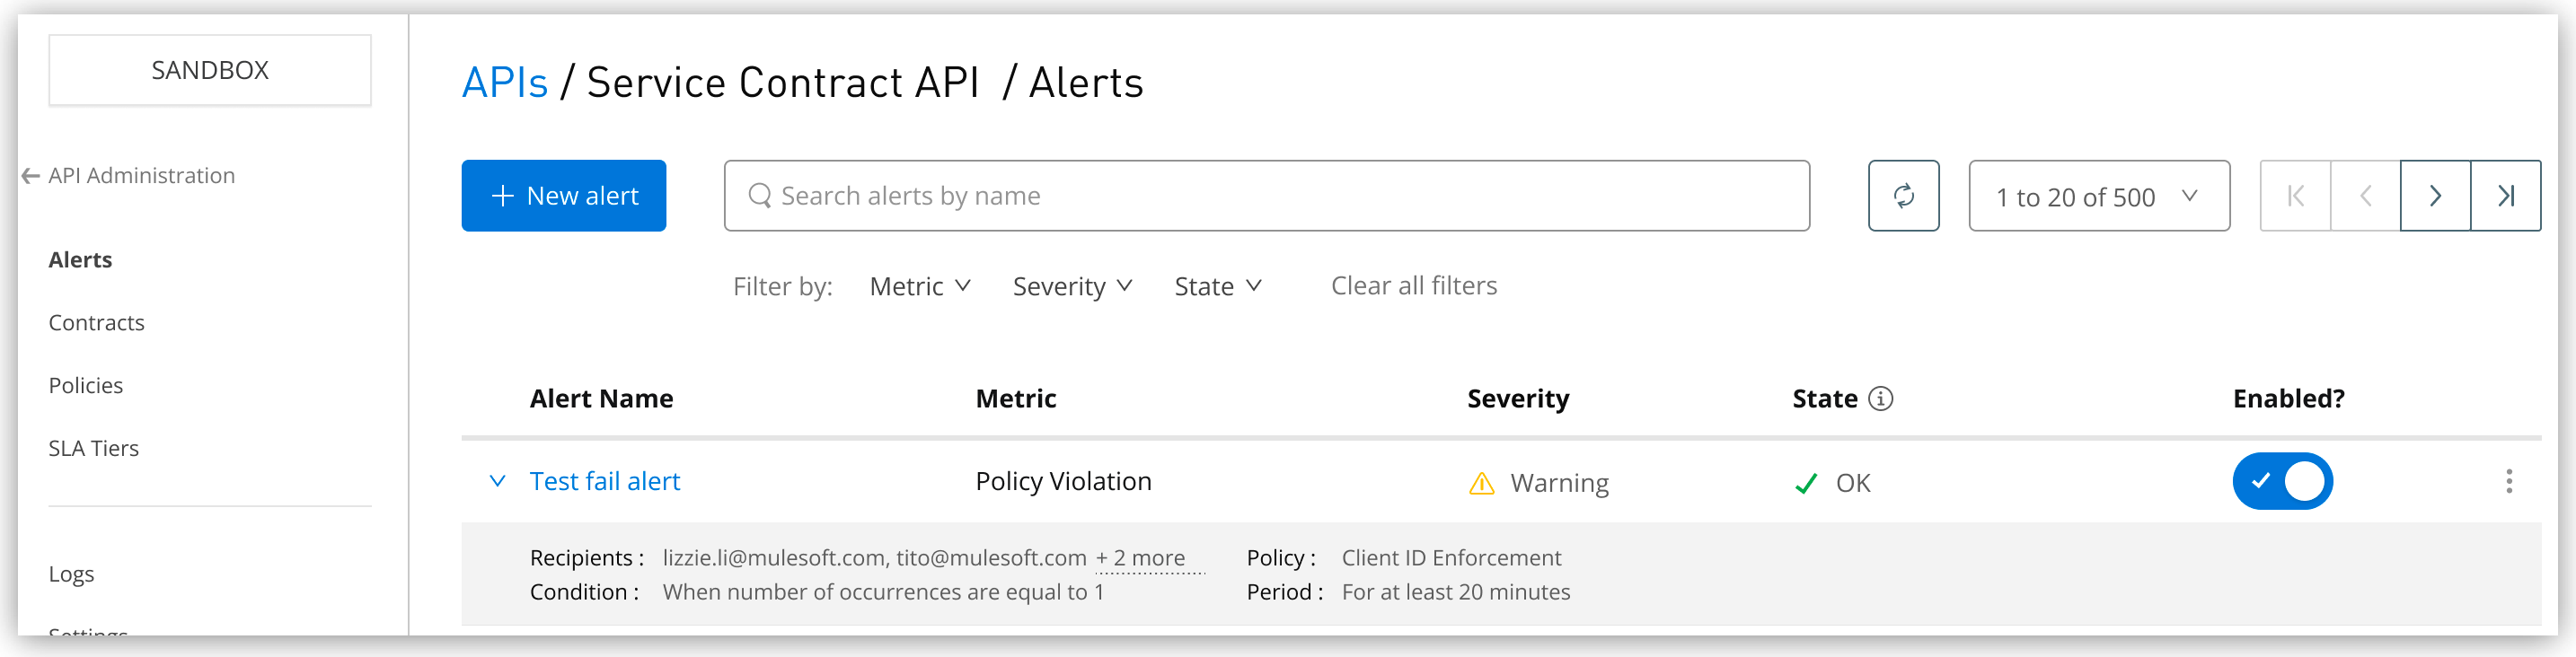 Viewing and adding alerts